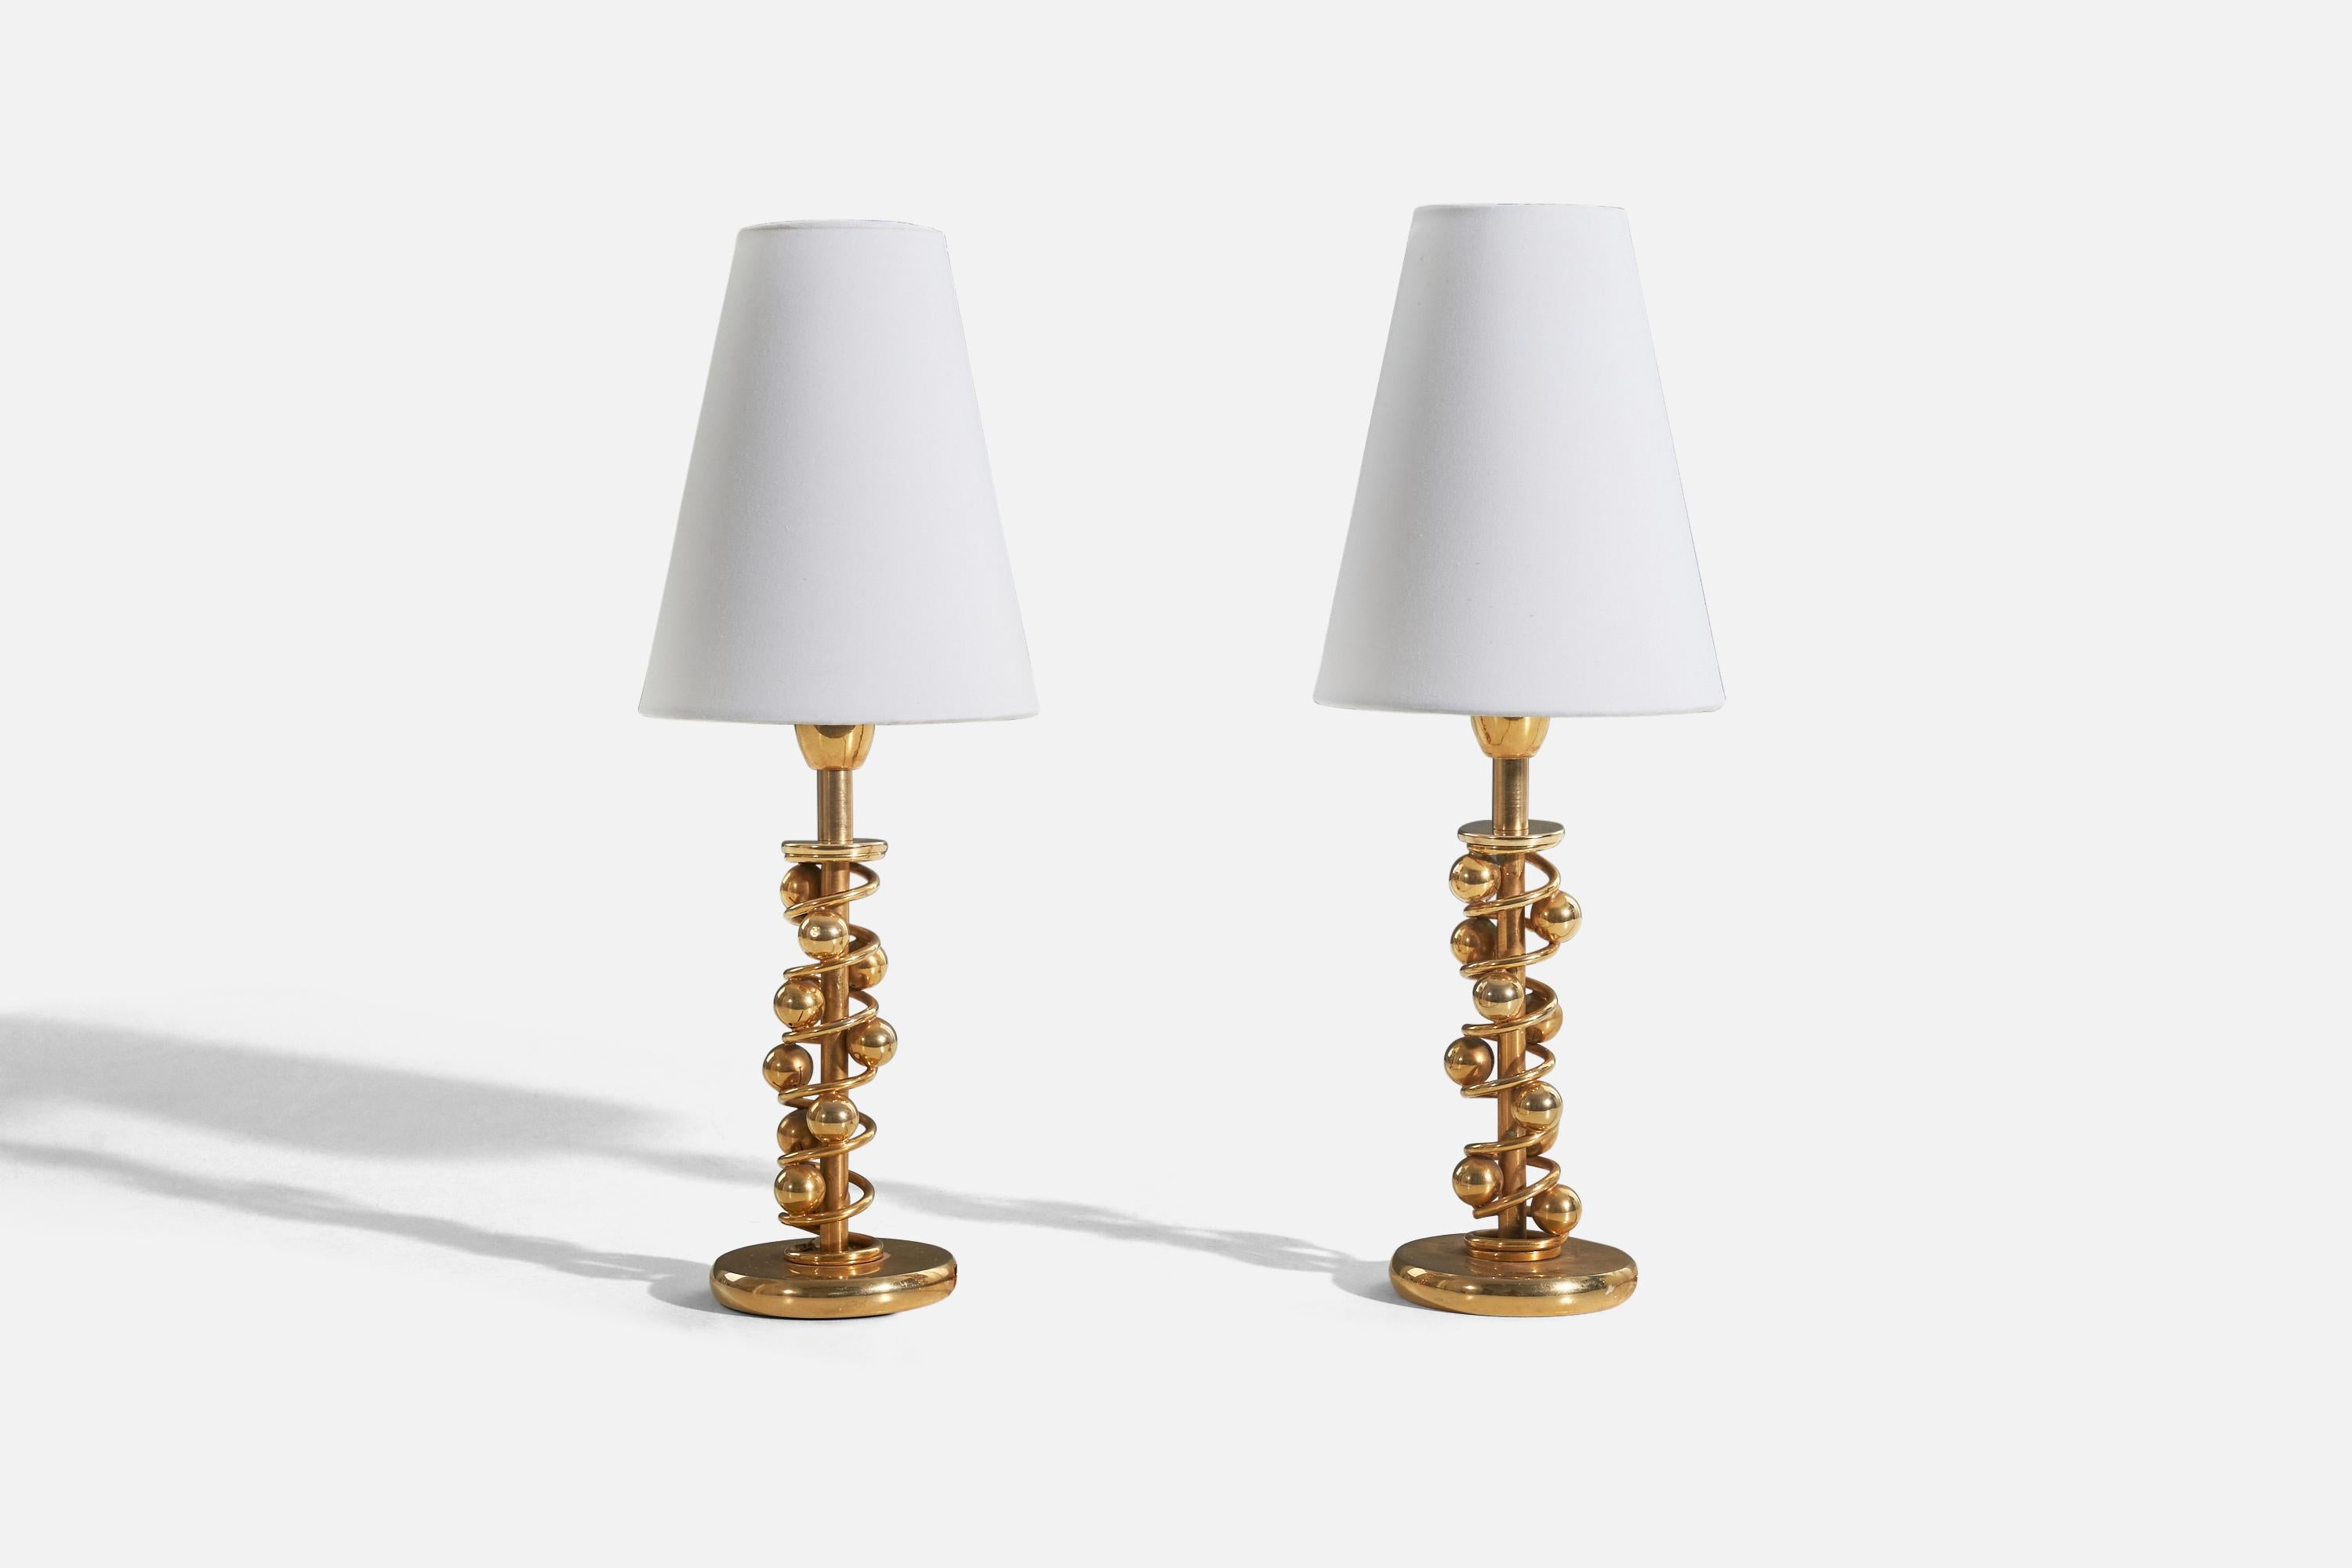 A pair of brass table lamps designed and produced in Italy, c. 1950s.

Sold without lampshade. 
Dimensions of Lamp (inches) : 9.5 x 3.46 x 3.46 (H x W x D)
Dimensions of Shade (inches) : 2.75 x 5.5 x 6.75 (T x B x S)
Dimension of Lamp with